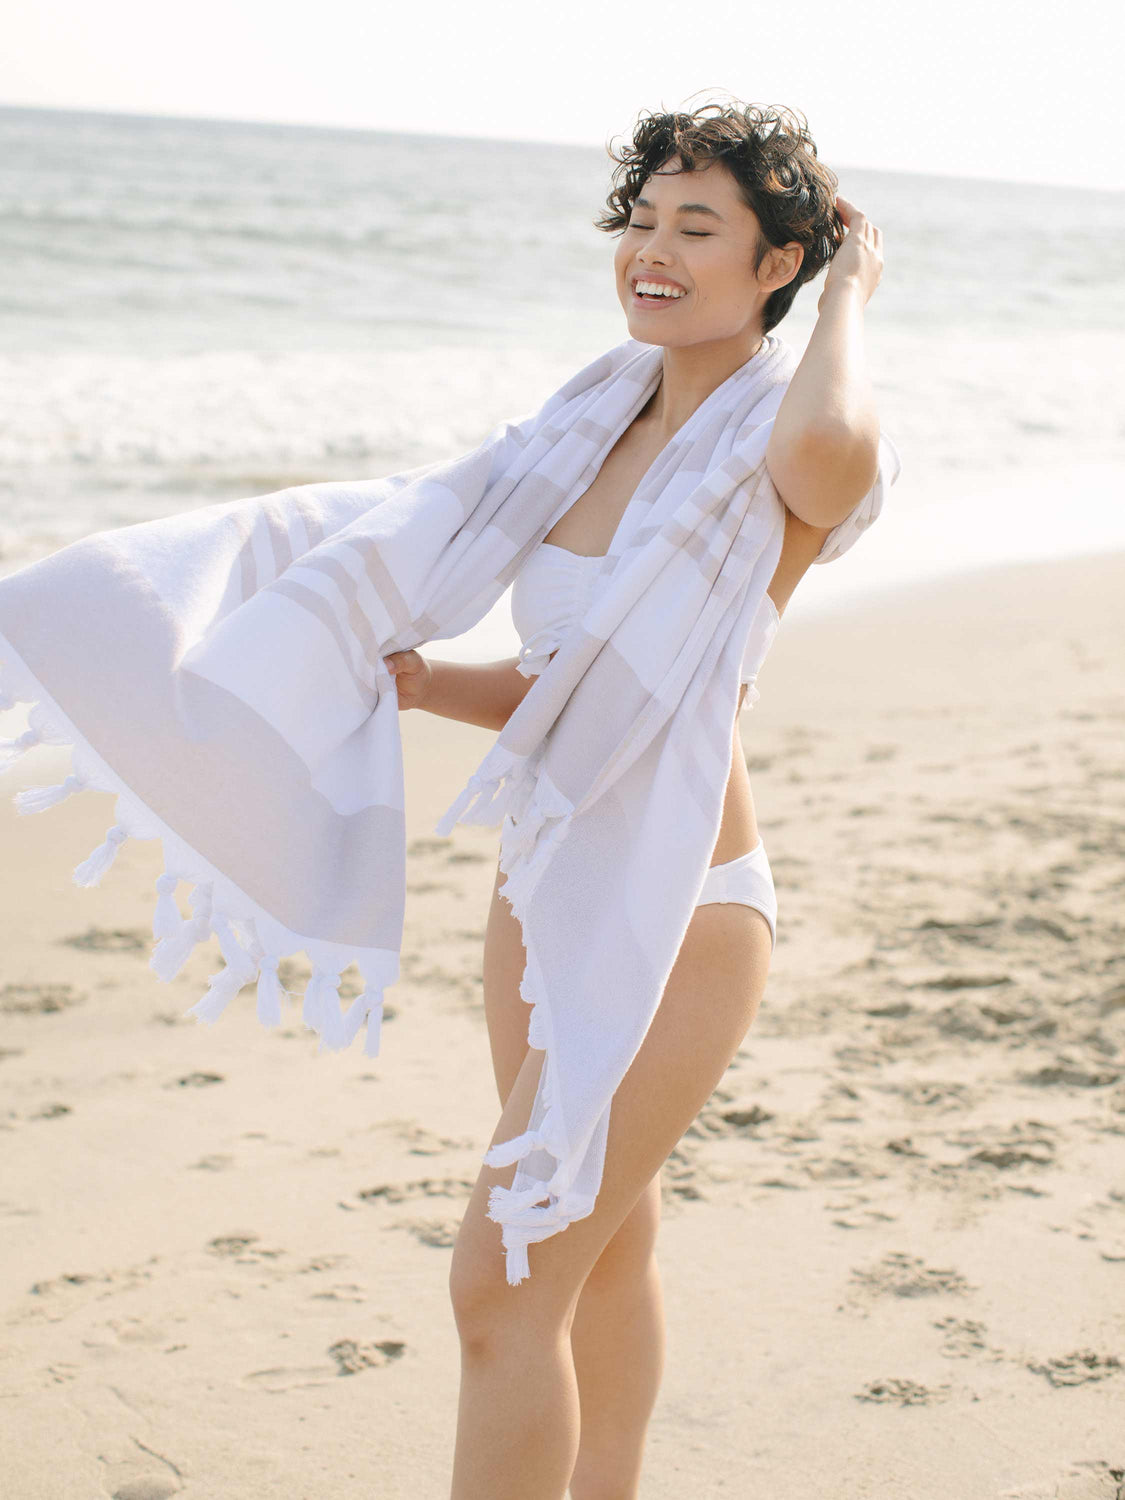 A woman standing on the beach wrapped in an oversized tan and white striped Turkish towel.